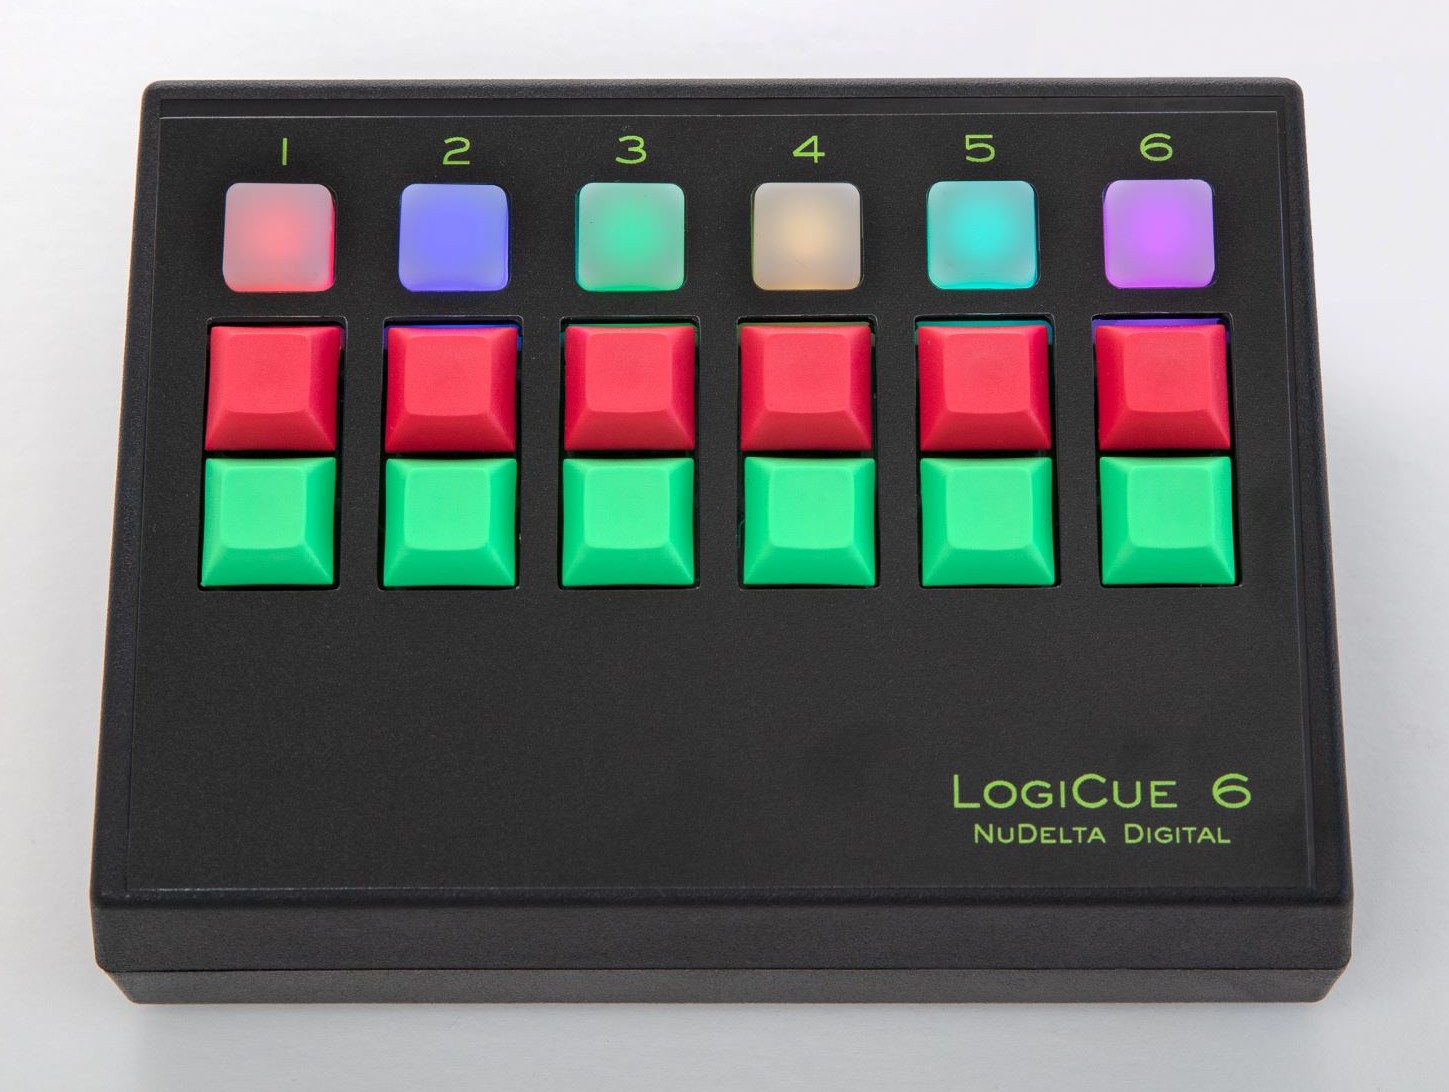 The LogiCue LC6 Digital Cue Light Controller, part of the LogiCue System of cue lights.